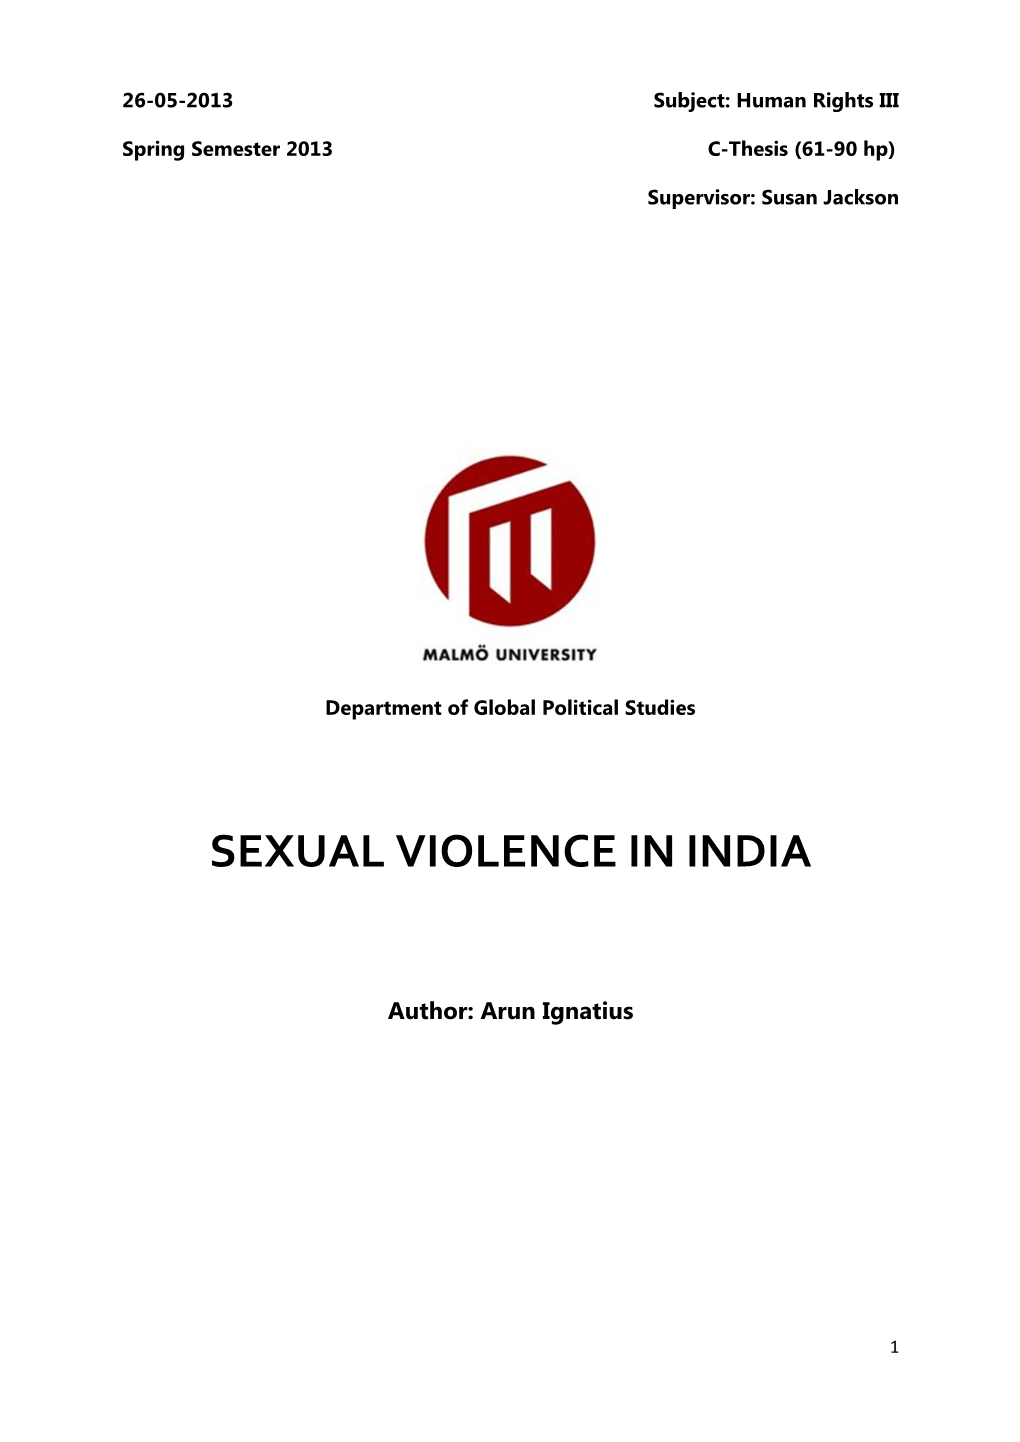 Sexual Violence in India